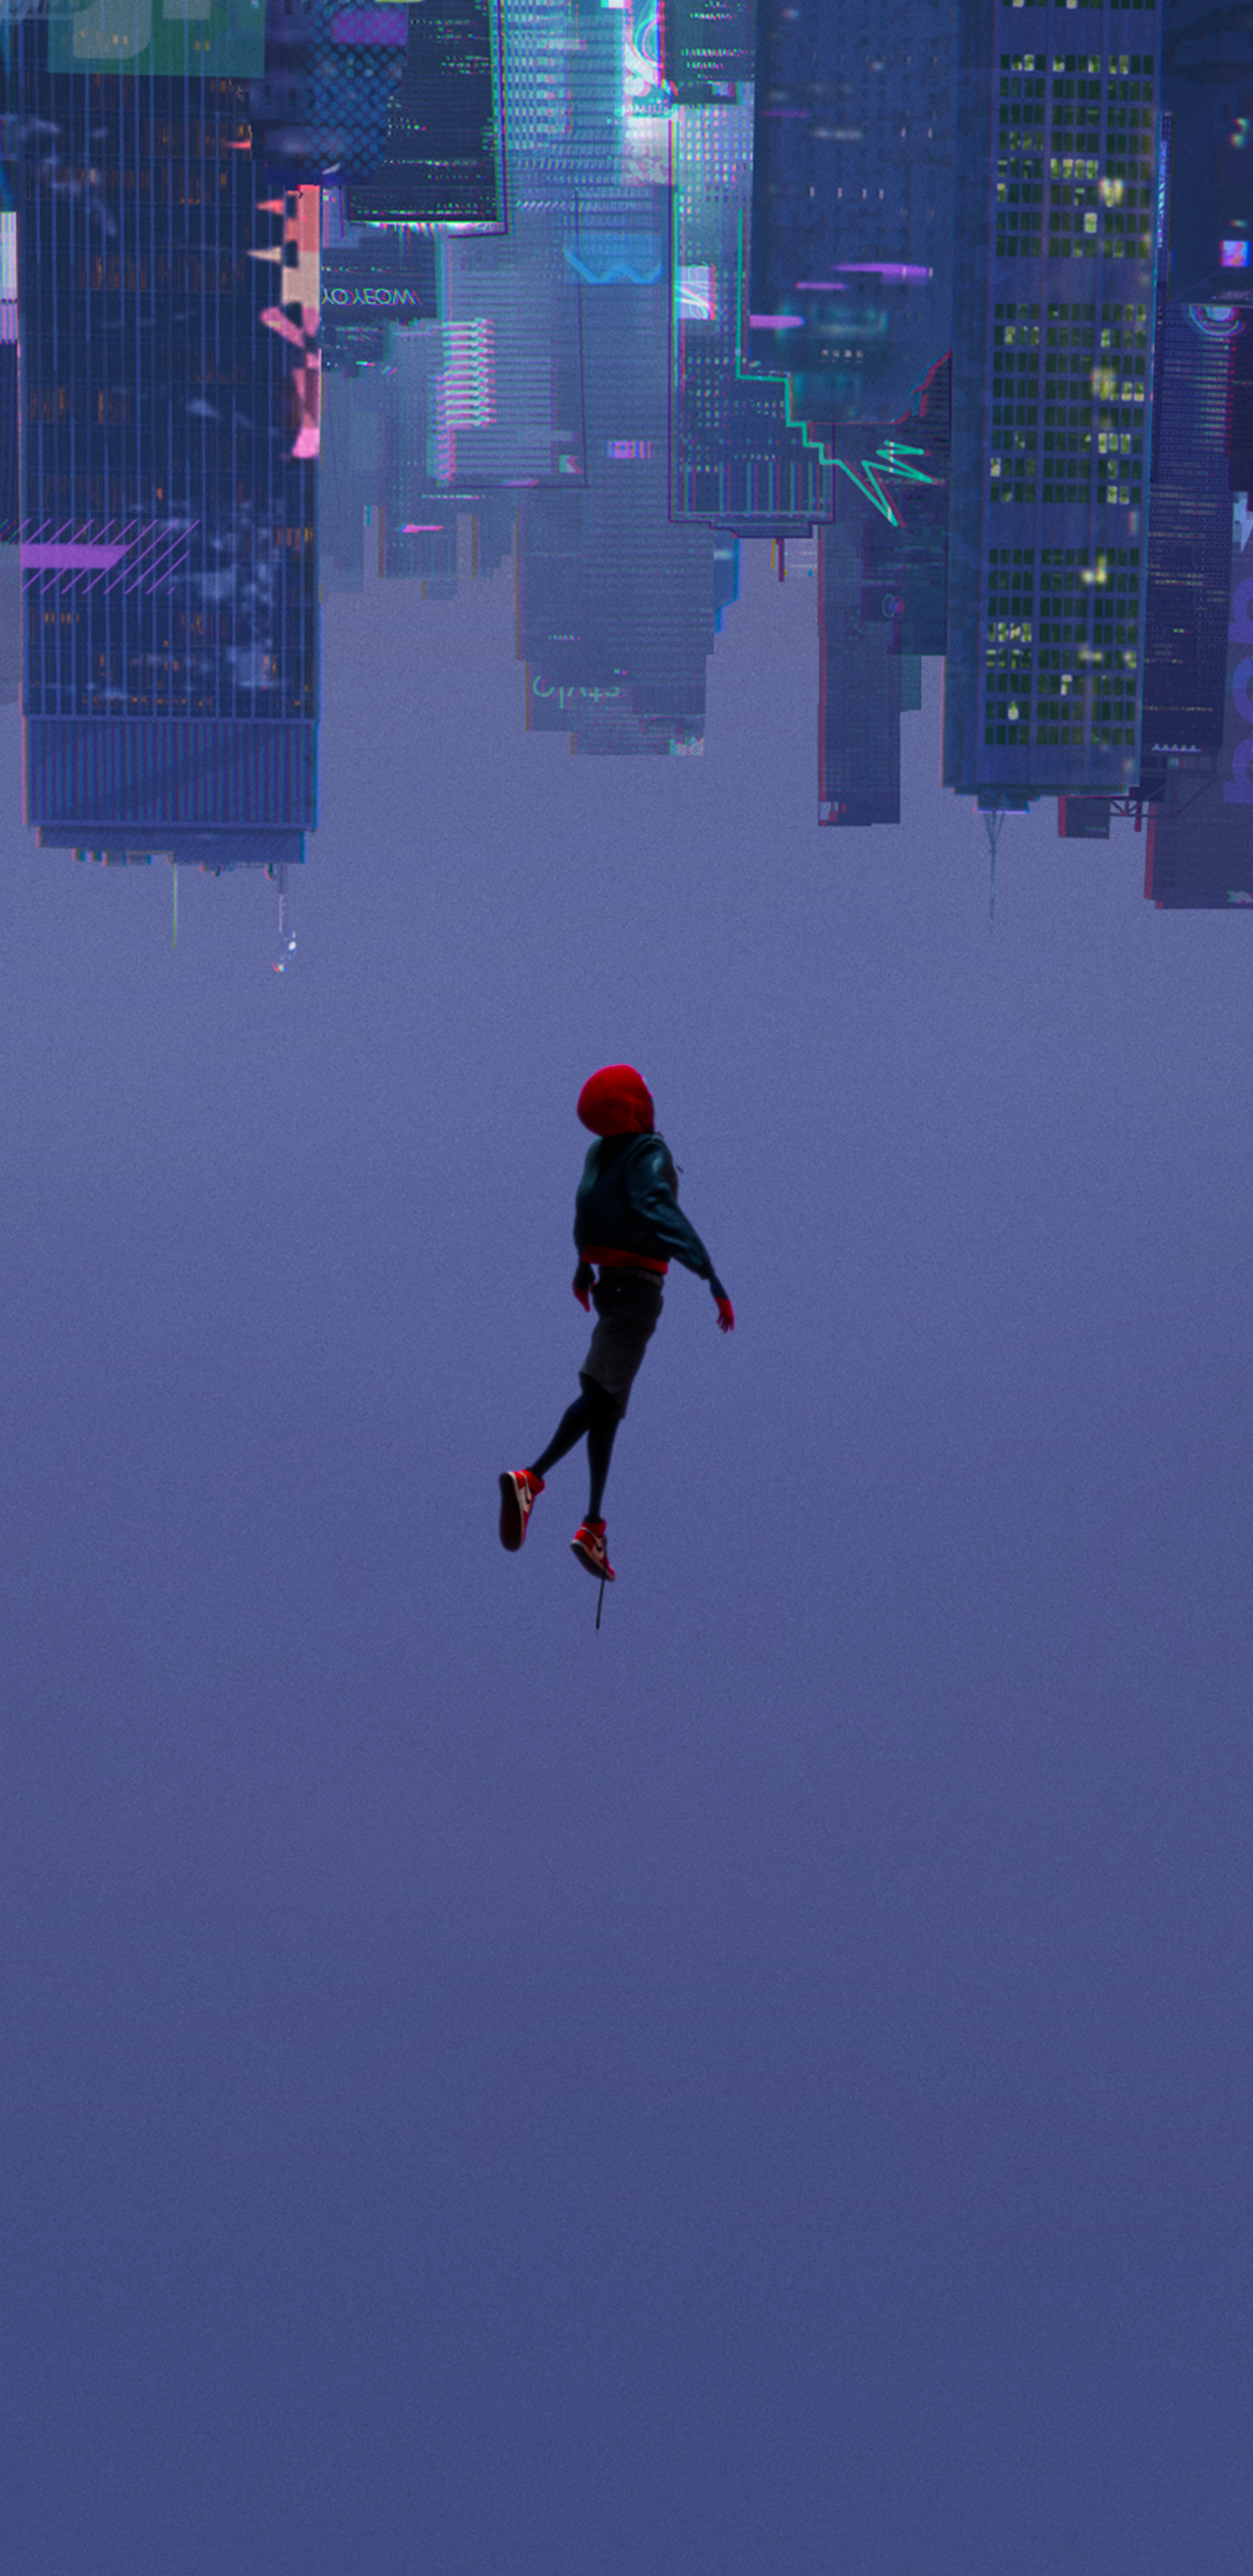 [24+] Spider Man Into The Spider Verse Wallpapers - WallpaperSafari